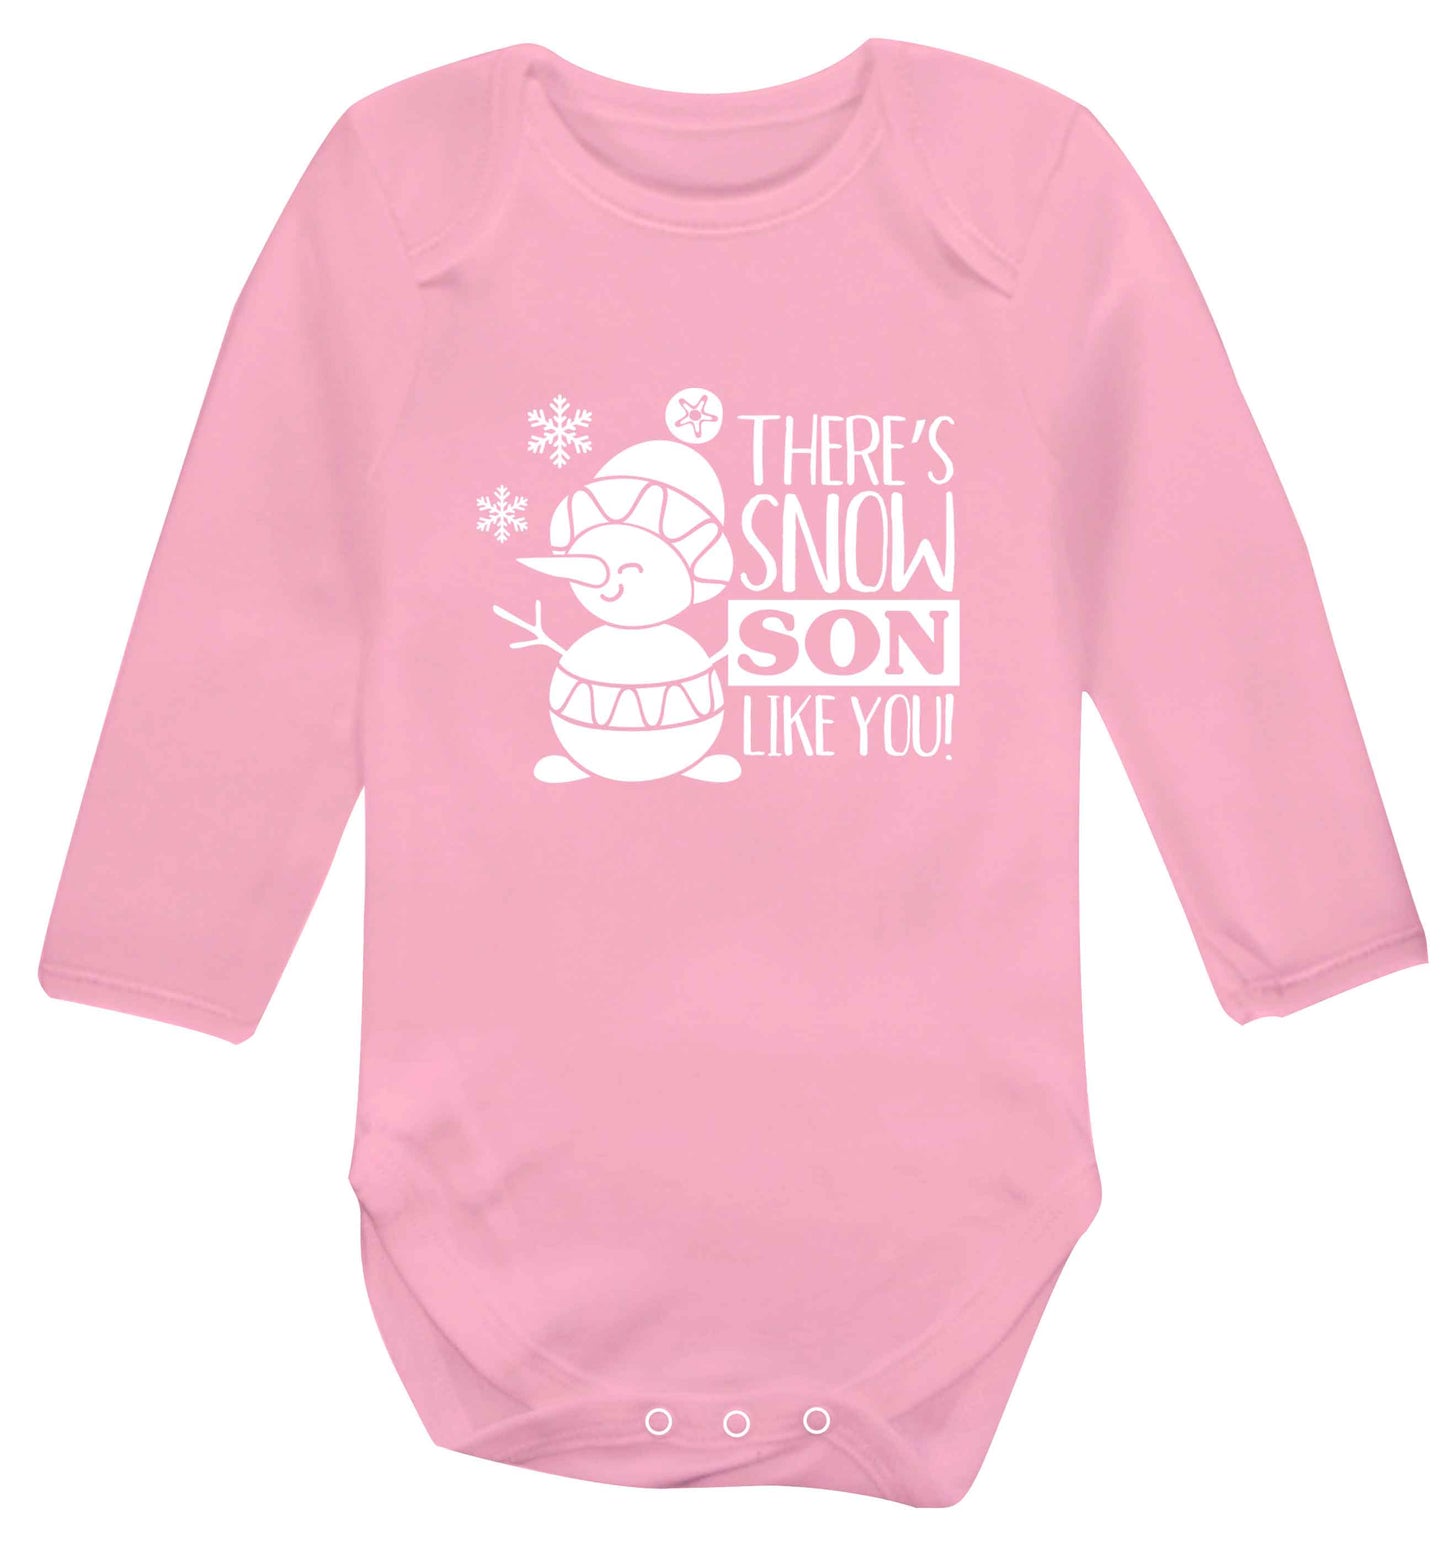 There's snow son like you baby vest long sleeved pale pink 6-12 months